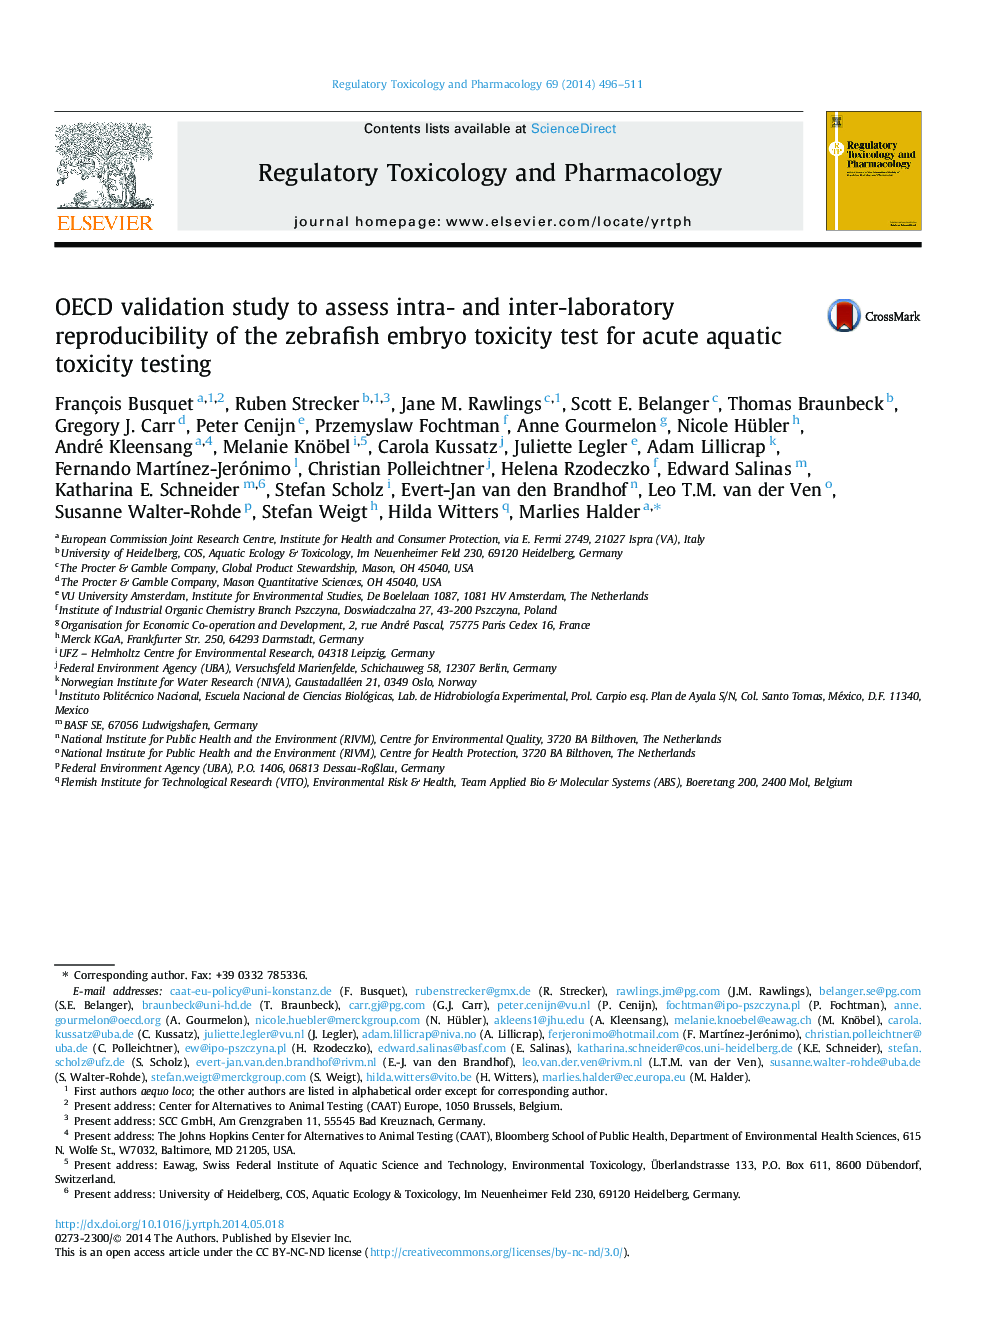 OECD validation study to assess intra- and inter-laboratory reproducibility of the zebrafish embryo toxicity test for acute aquatic toxicity testing